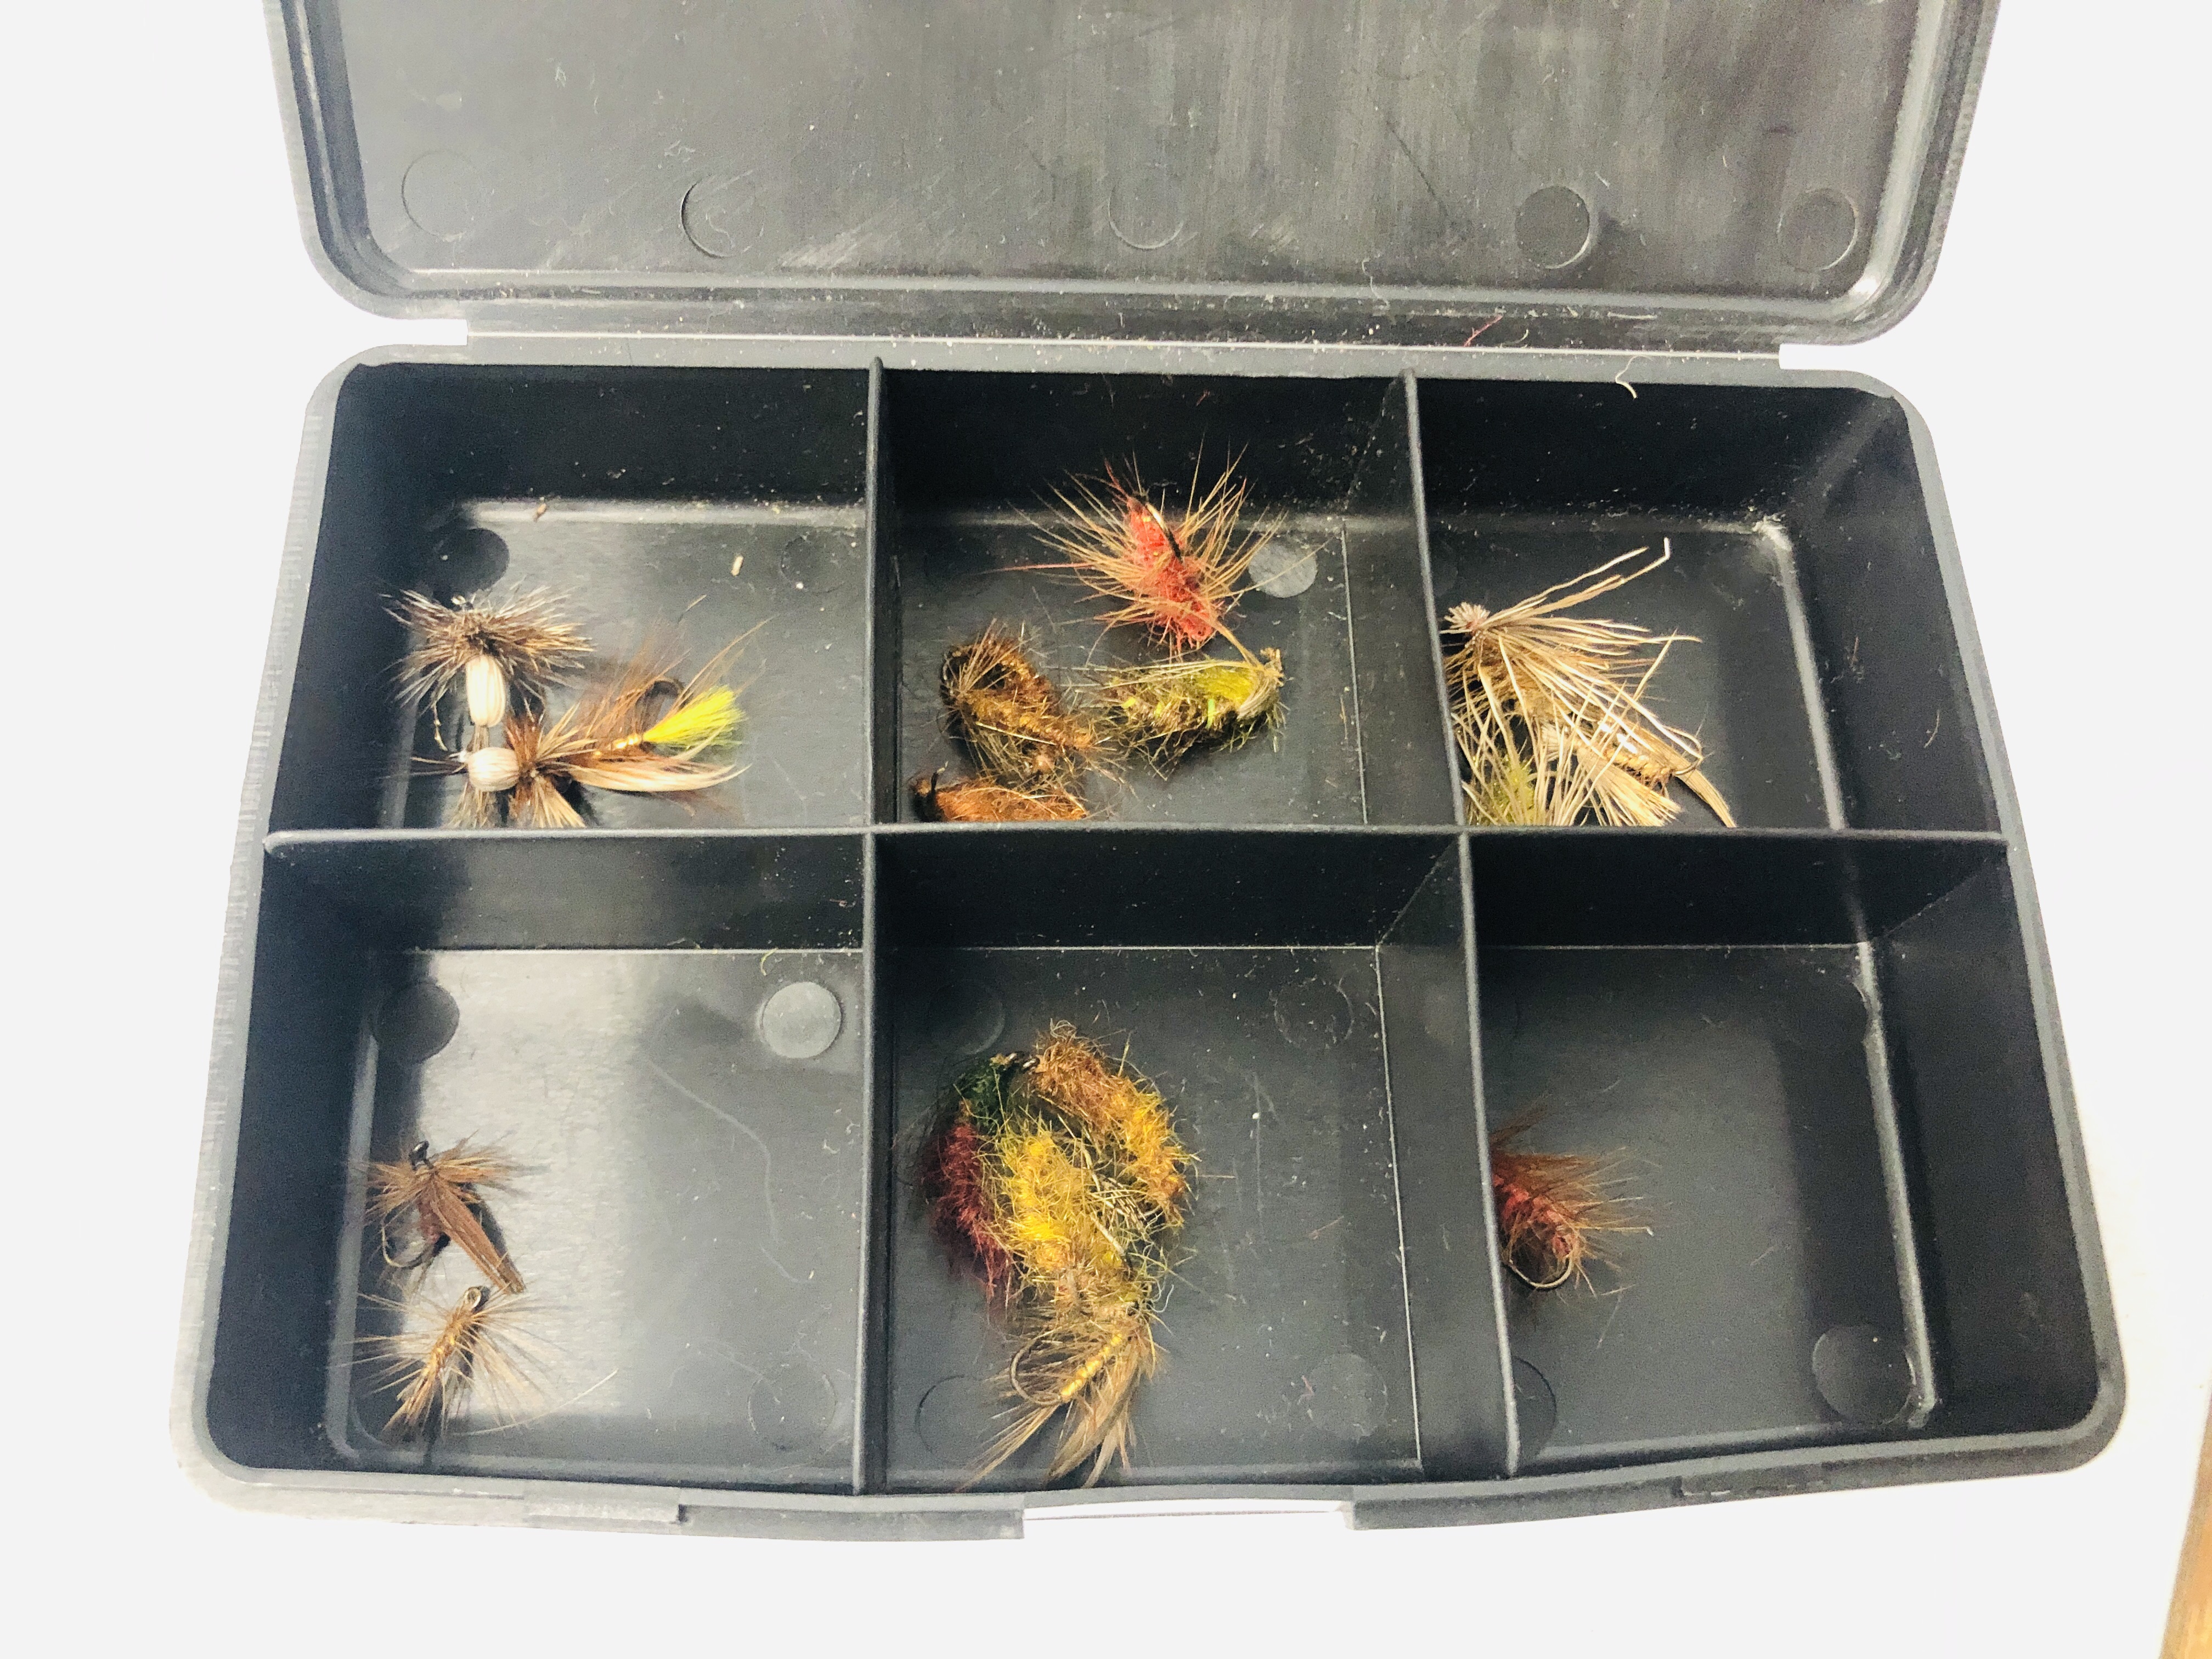 SIX CASES CONTAINING AN ASSORTMENT OF FISHING FLIES. - Image 9 of 9